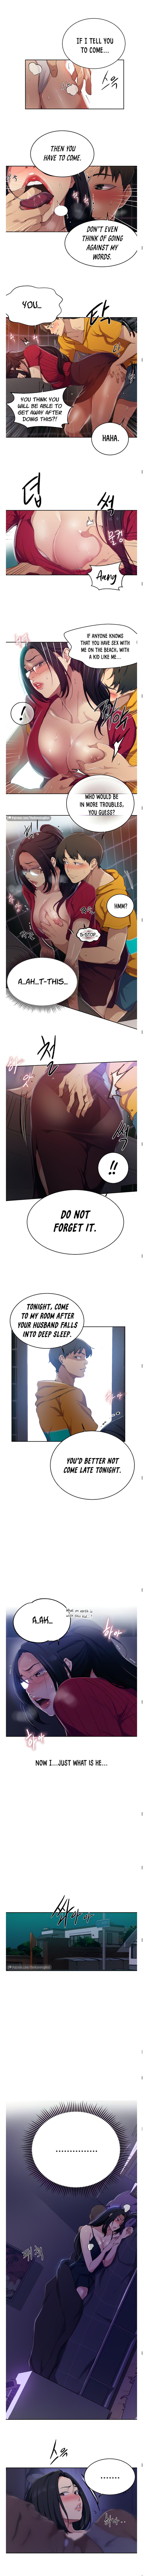 Bro Secret Class Ch.121/? Spooning - Page 3